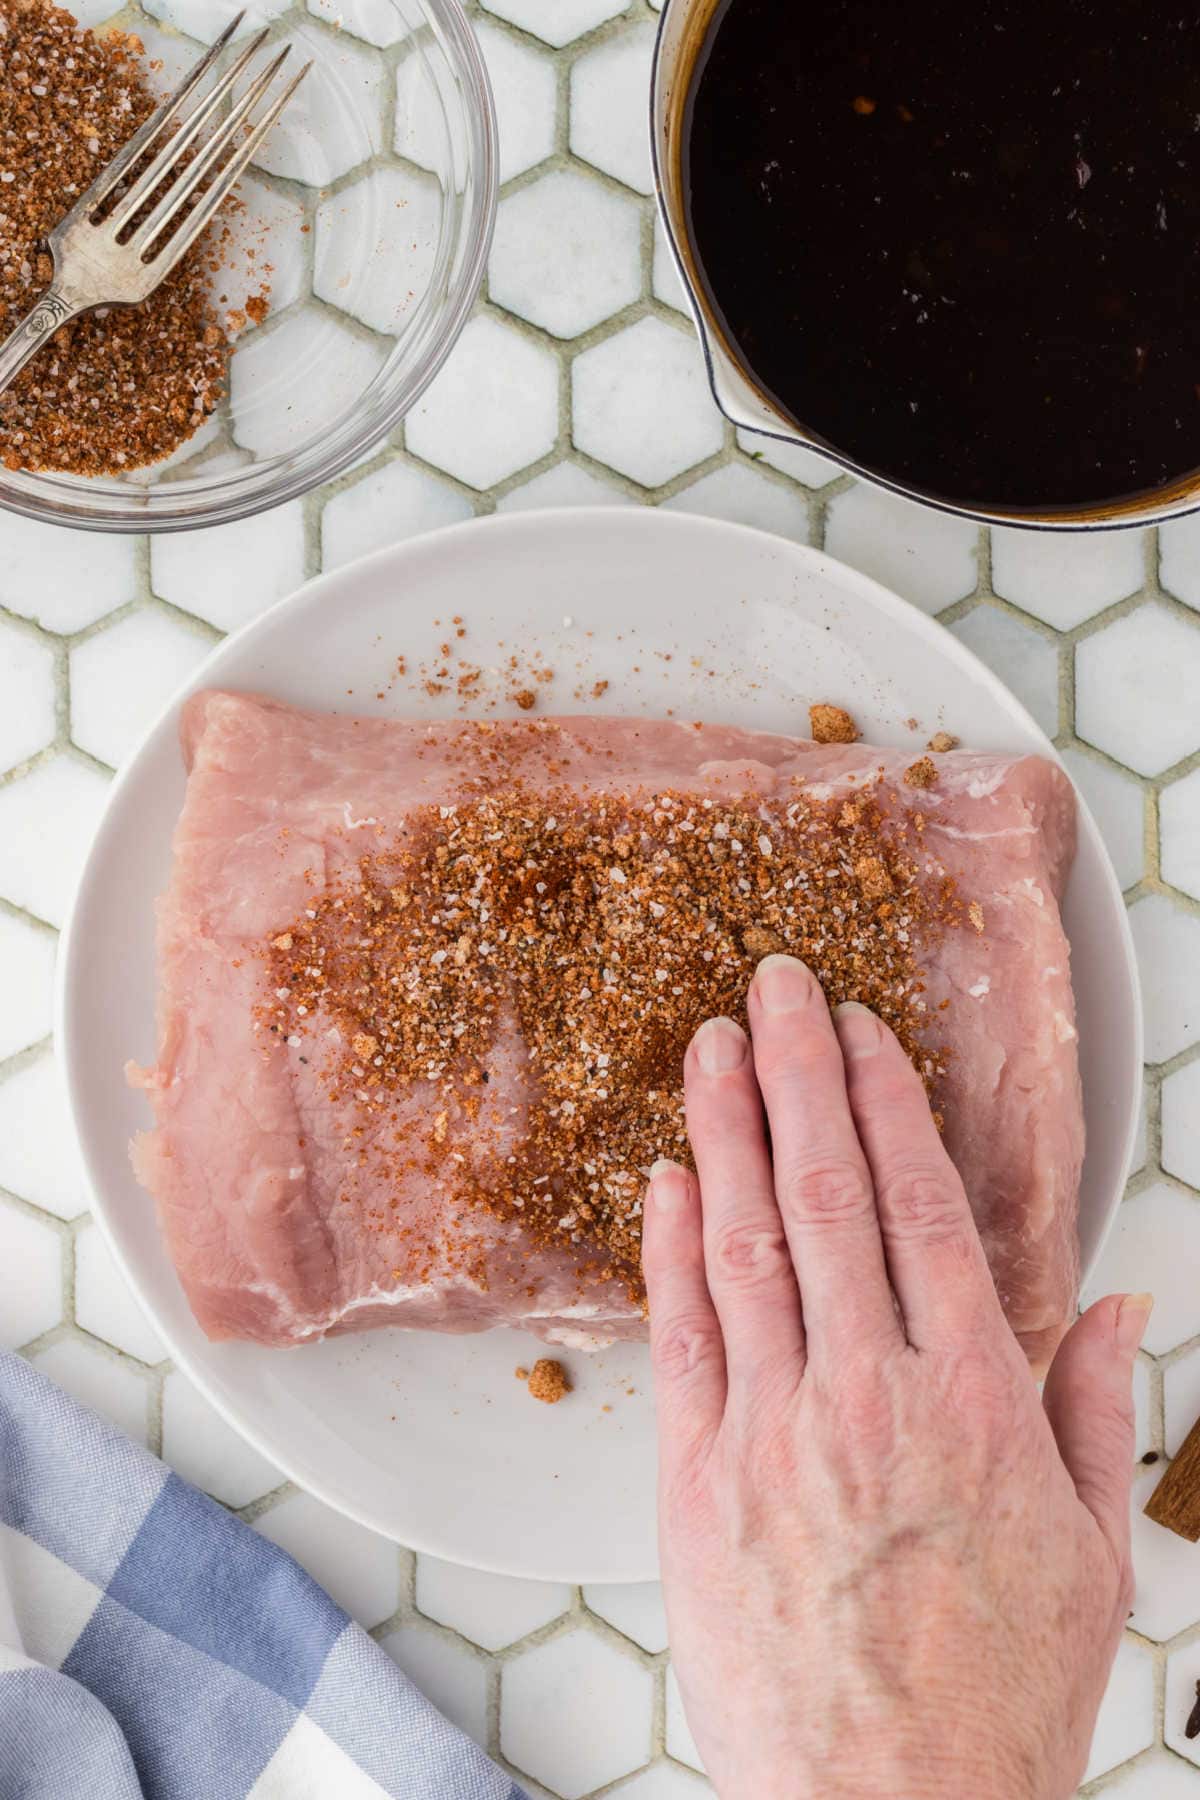 Dry rub being patted onto the pork loin.